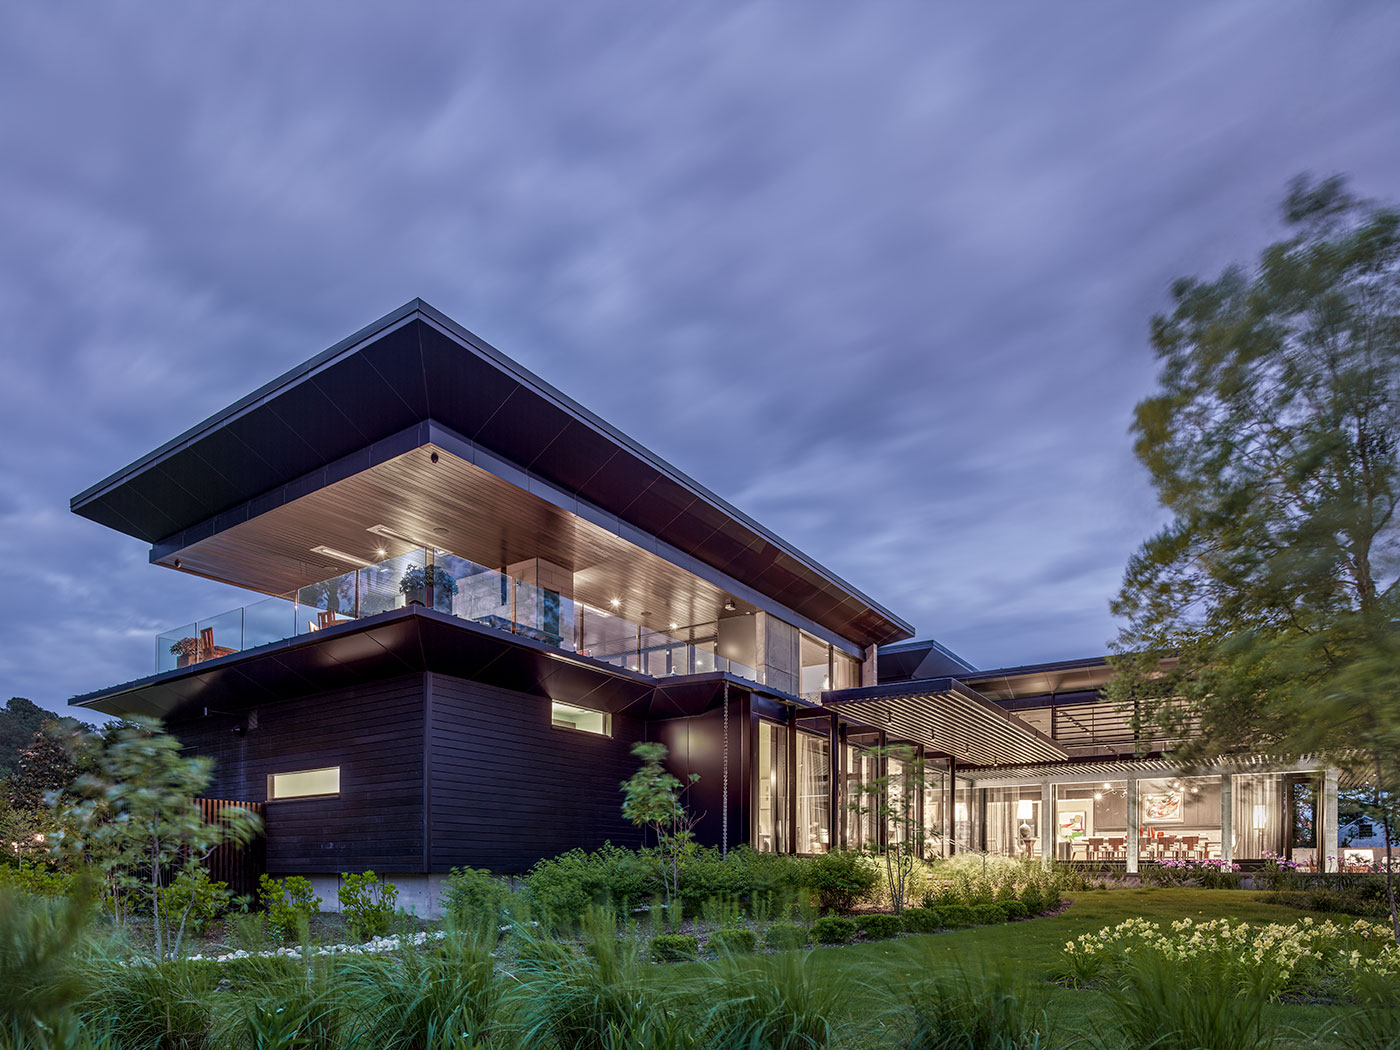 Modern and Green Virginia Beach Home on Linkhorn Bay with Second Floor Covered Porch, Triple Pane Windows, Shou Sugi Ban Wood Siding Dark Stained Trellis, Concrete Walls and Piers, Concrete Paving, Steel Structure and Reynobond Metal Panels by Virginia Beach Architect Allison Ewing.